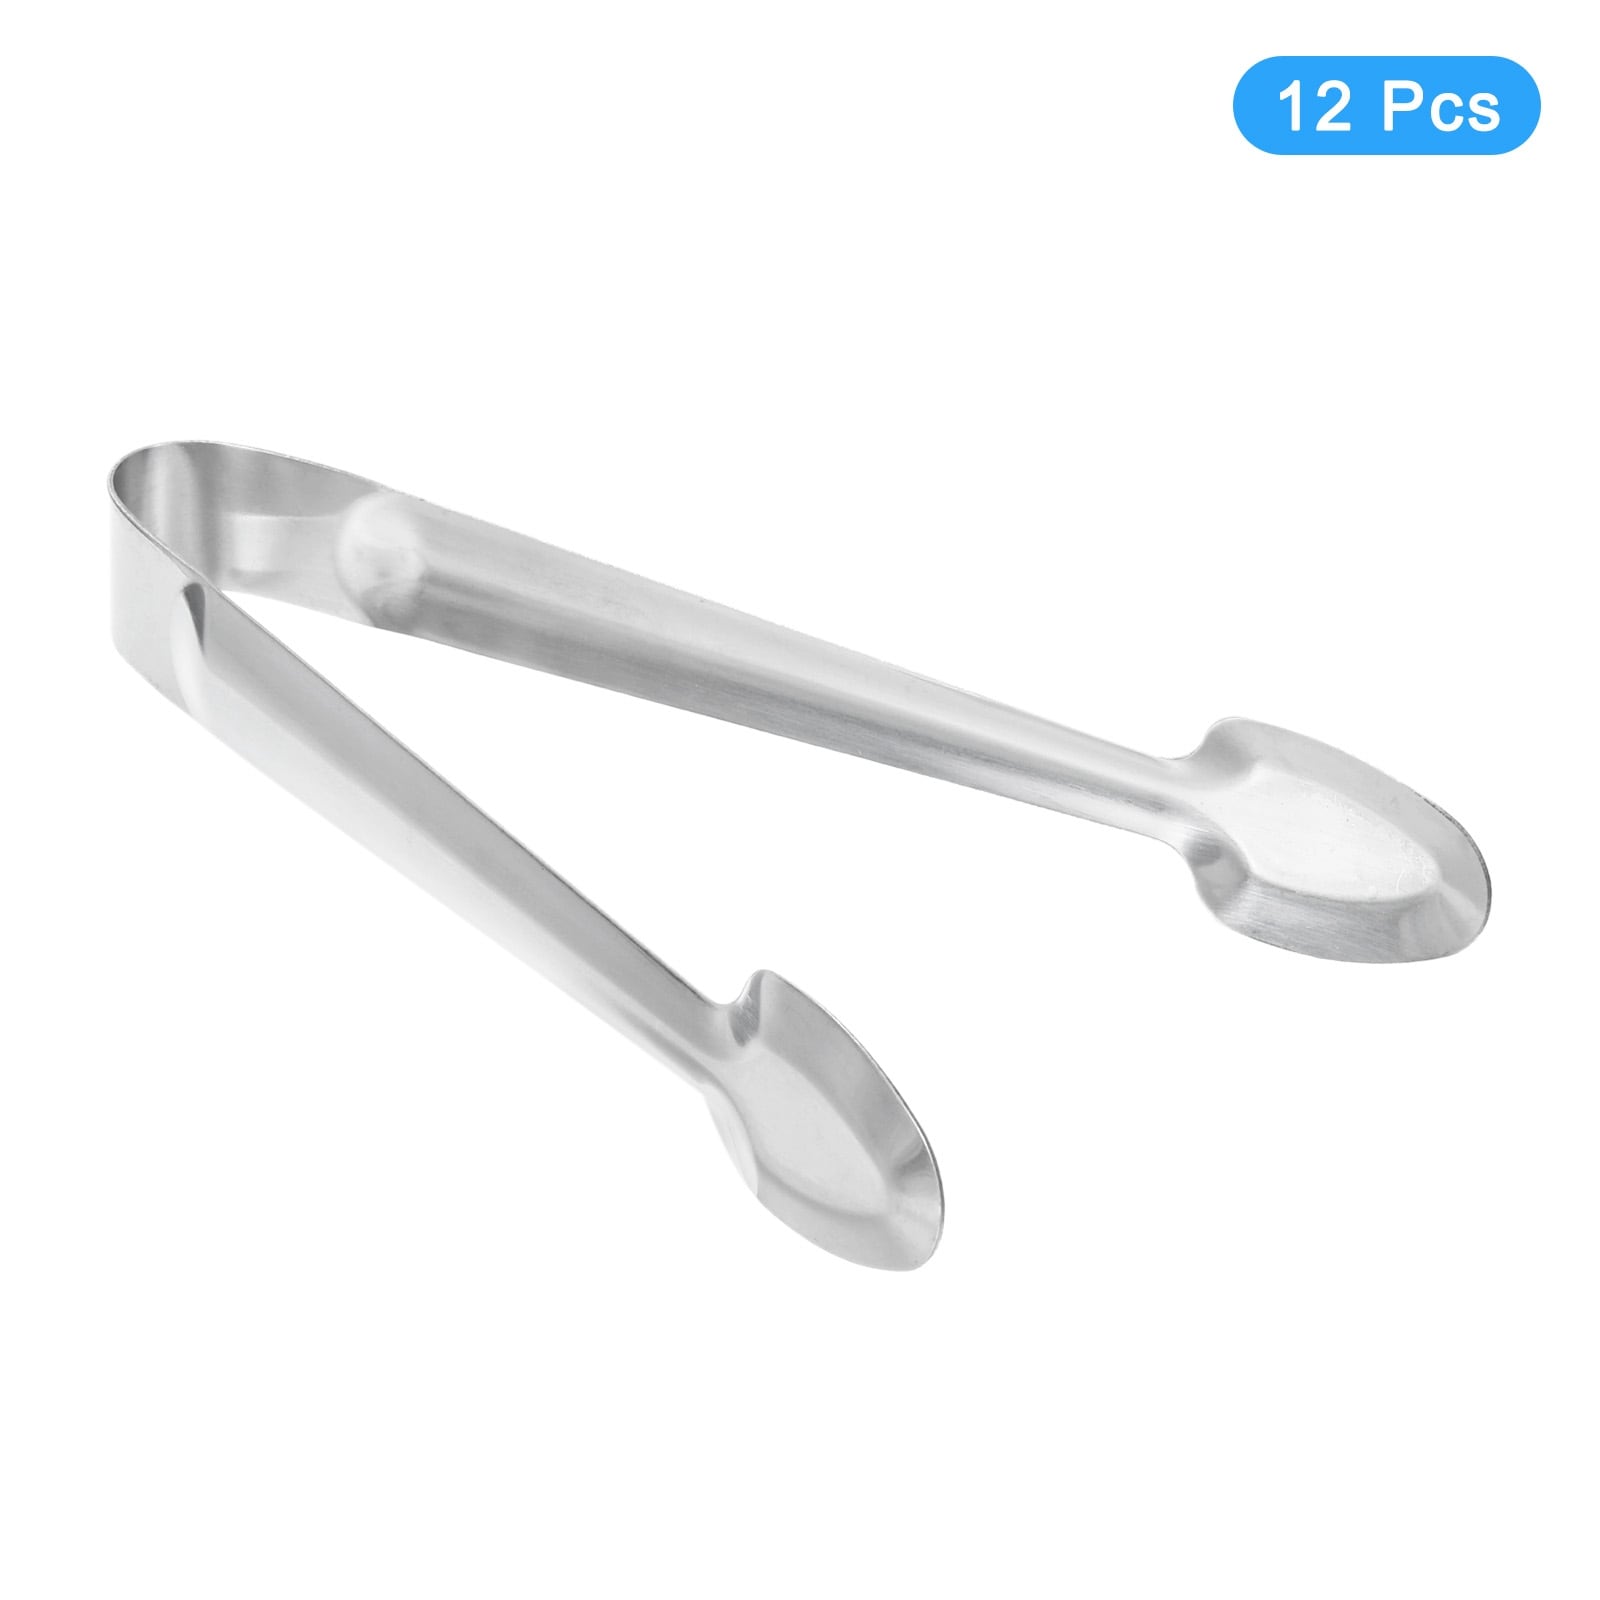 https://ak1.ostkcdn.com/images/products/is/images/direct/741694720b8fd5d5b8f6d2e396c8e7cd2df858bb/Serving-Tongs%2C-12pcs-5-Inch-Stainless-Steel-Ice-Tongs%2C-Mini-Sugar-Tongs.jpg